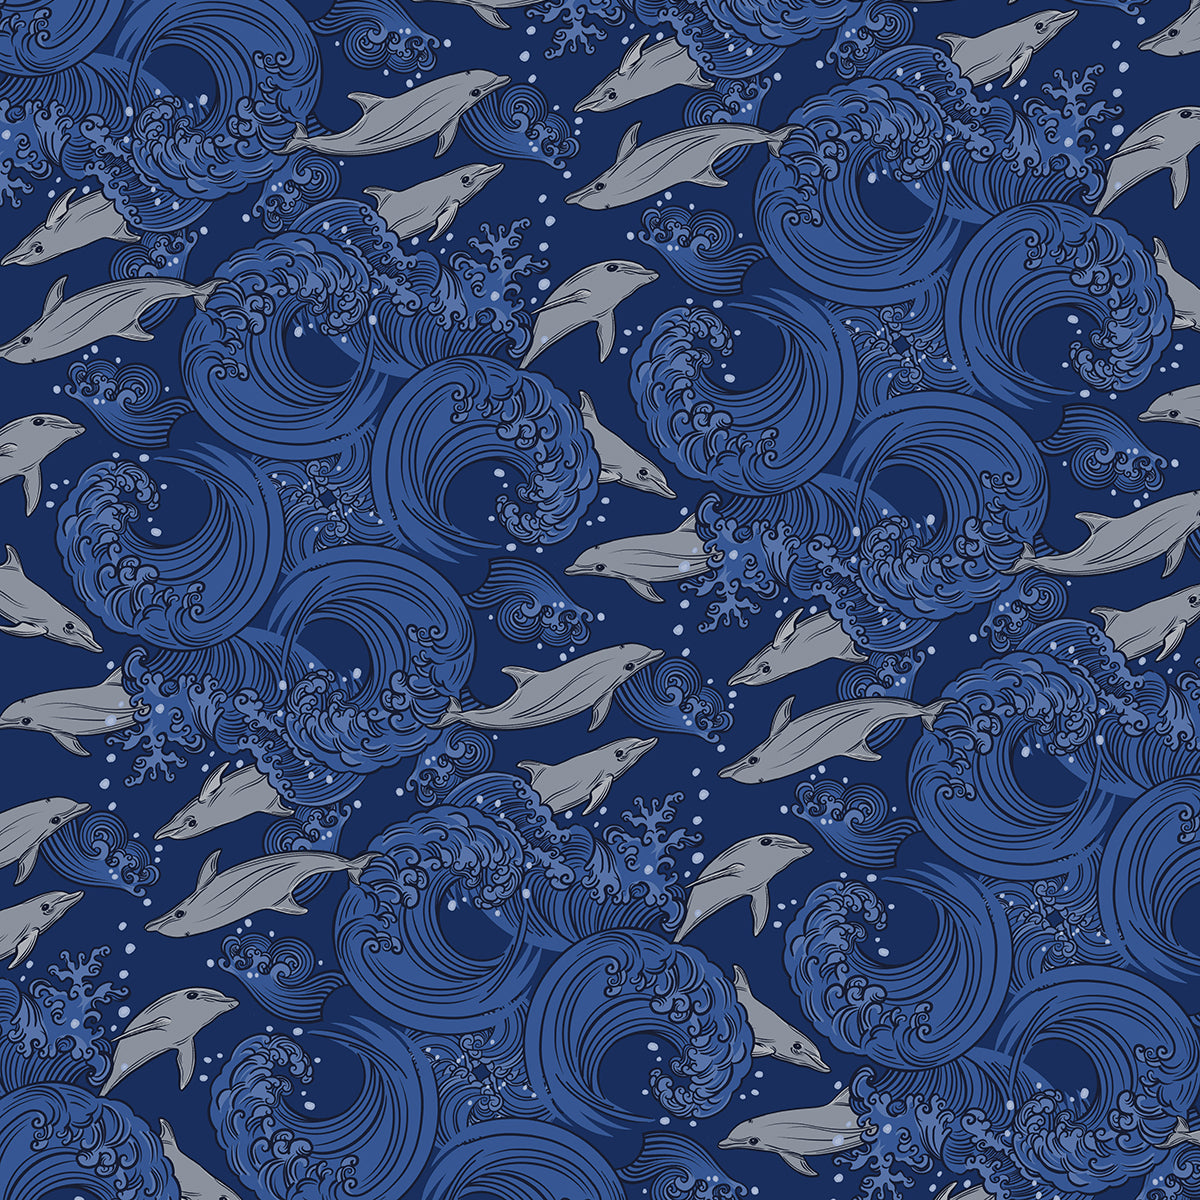 Dolphins on rolling waves Sarong - Pareo